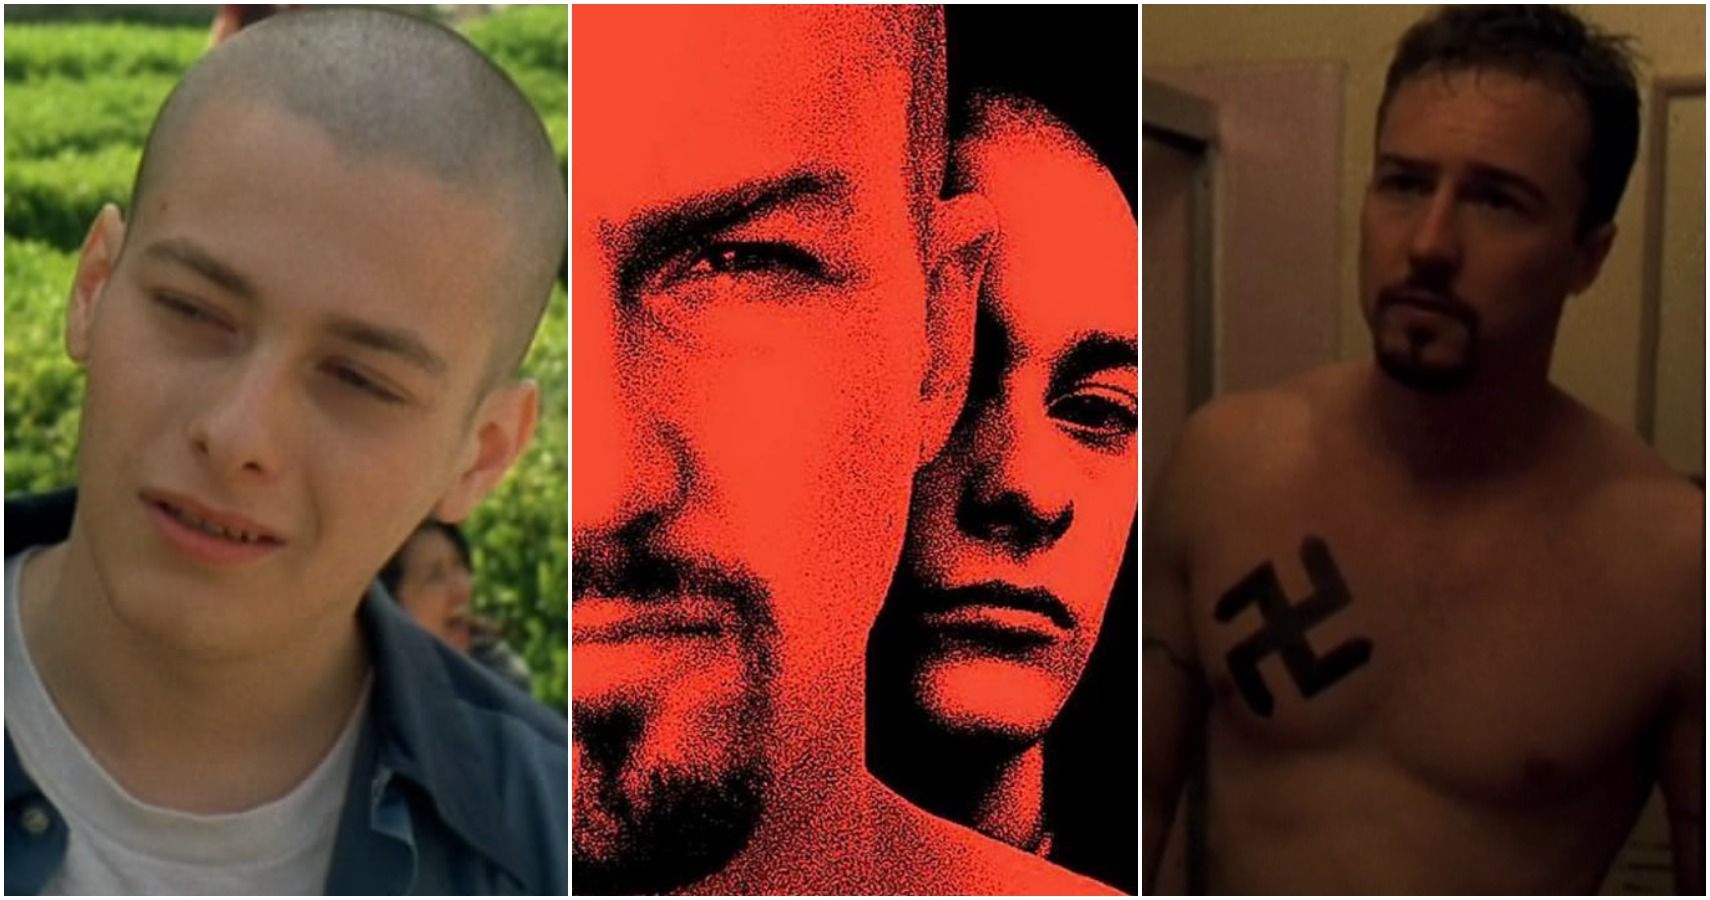 american history x tattoos dog meaning